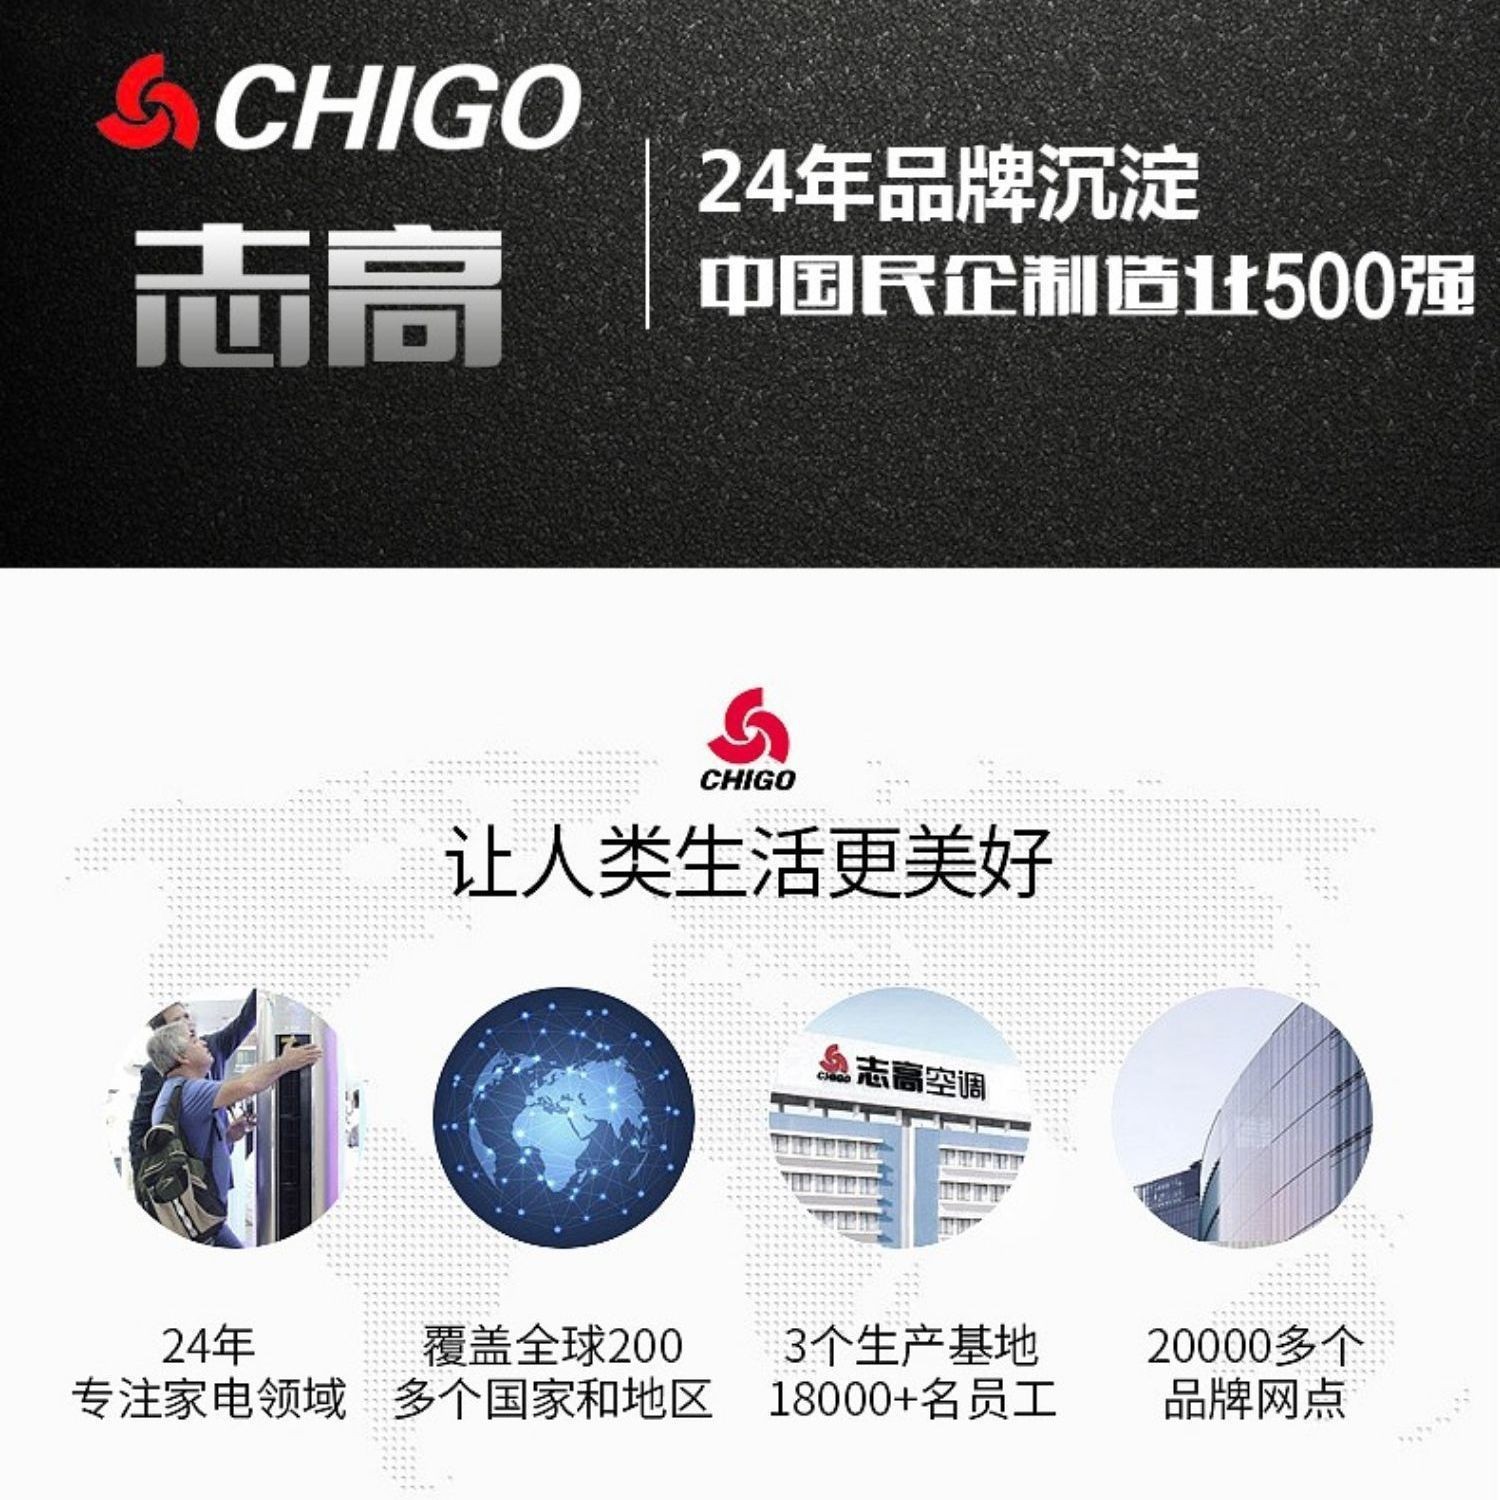 Chigo Three-door Refrigerator Small Household Fans Energy-saving Double-door Rental Housing Dormitory Two-person World Refrigeration And Freezing